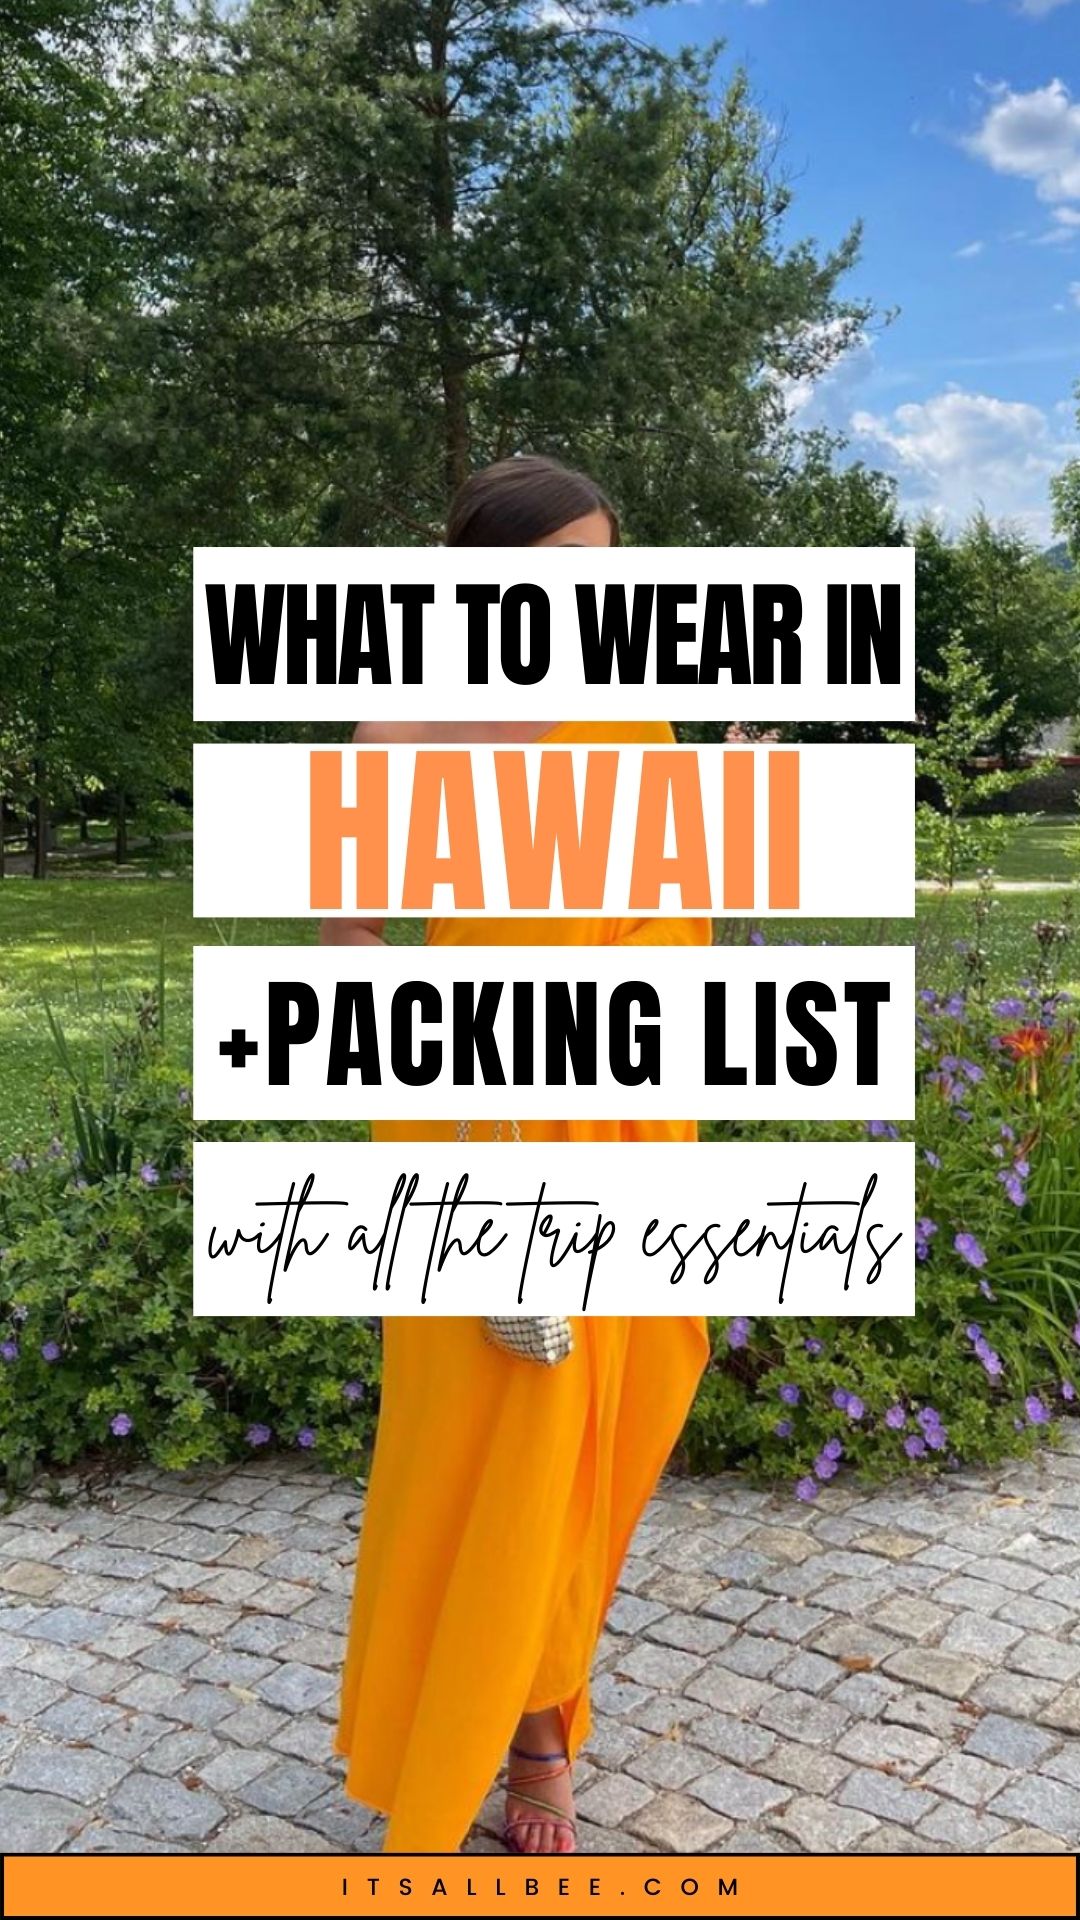 Discover the ultimate Hawaiian outfit inspiration with our top 21 ensemble ideas for every island activity. From beach lounging to elegant dinners, our packing list ensures you're stylishly prepared for paradise. #HawaiiFashion #TravelInStyle | Hawaii Outfit ideas | Hawaii Summer Outfit | Spring Outfit | Beach Outfit | Vacation Outfit